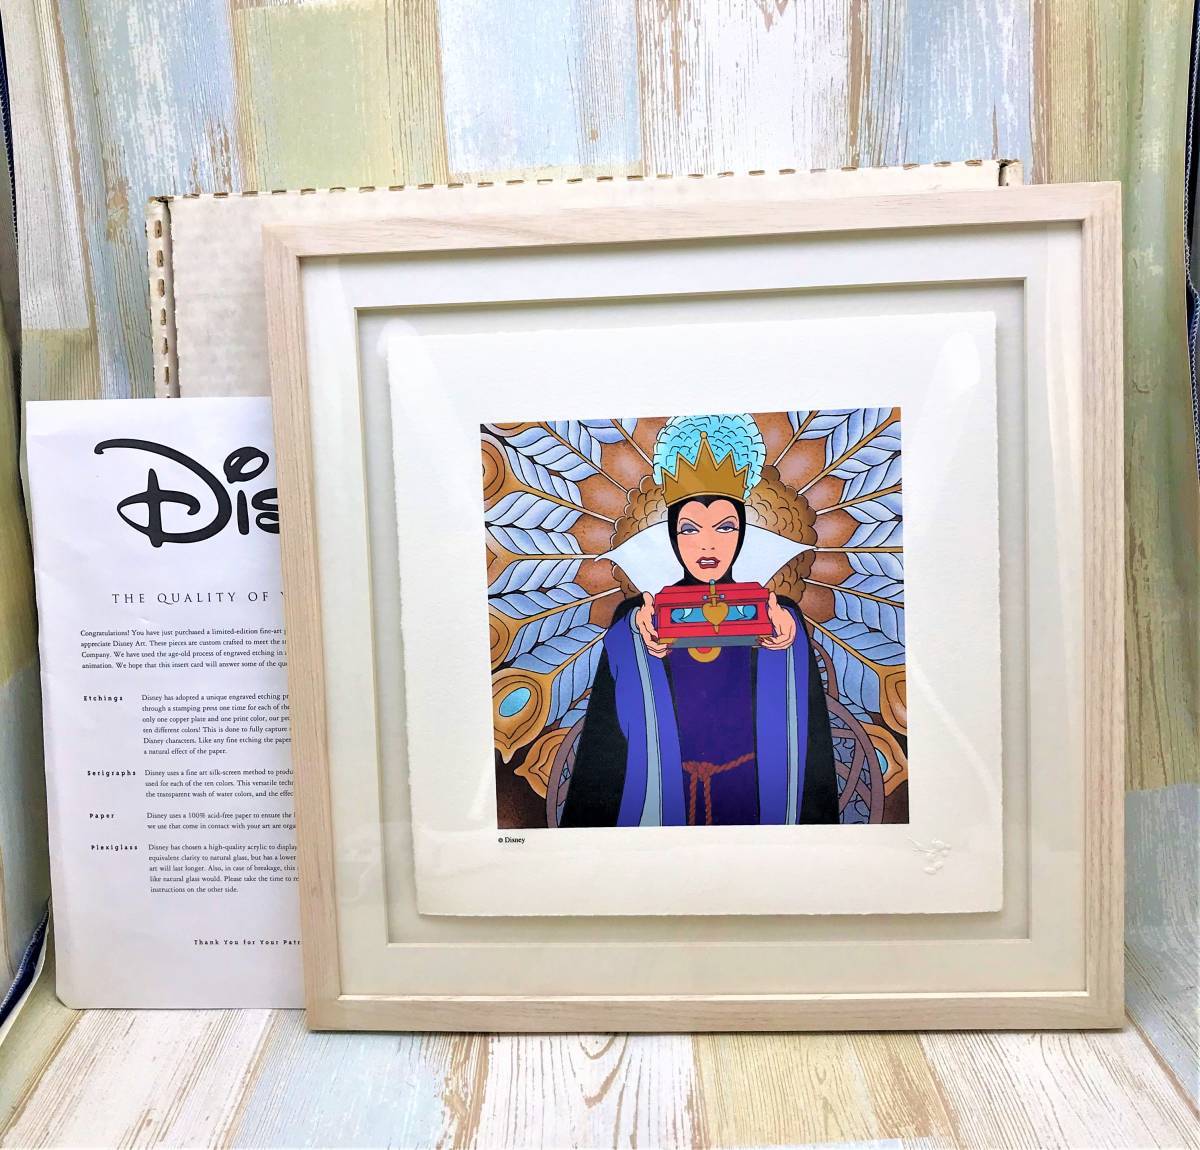 Limited Edition★Snow White, Seven Dwarfs, Witch, Queen, Villains, Art Gallery★Disney Treasure, Disney TDL, Picture, Painting, Frame, antique, collection, Disney, others